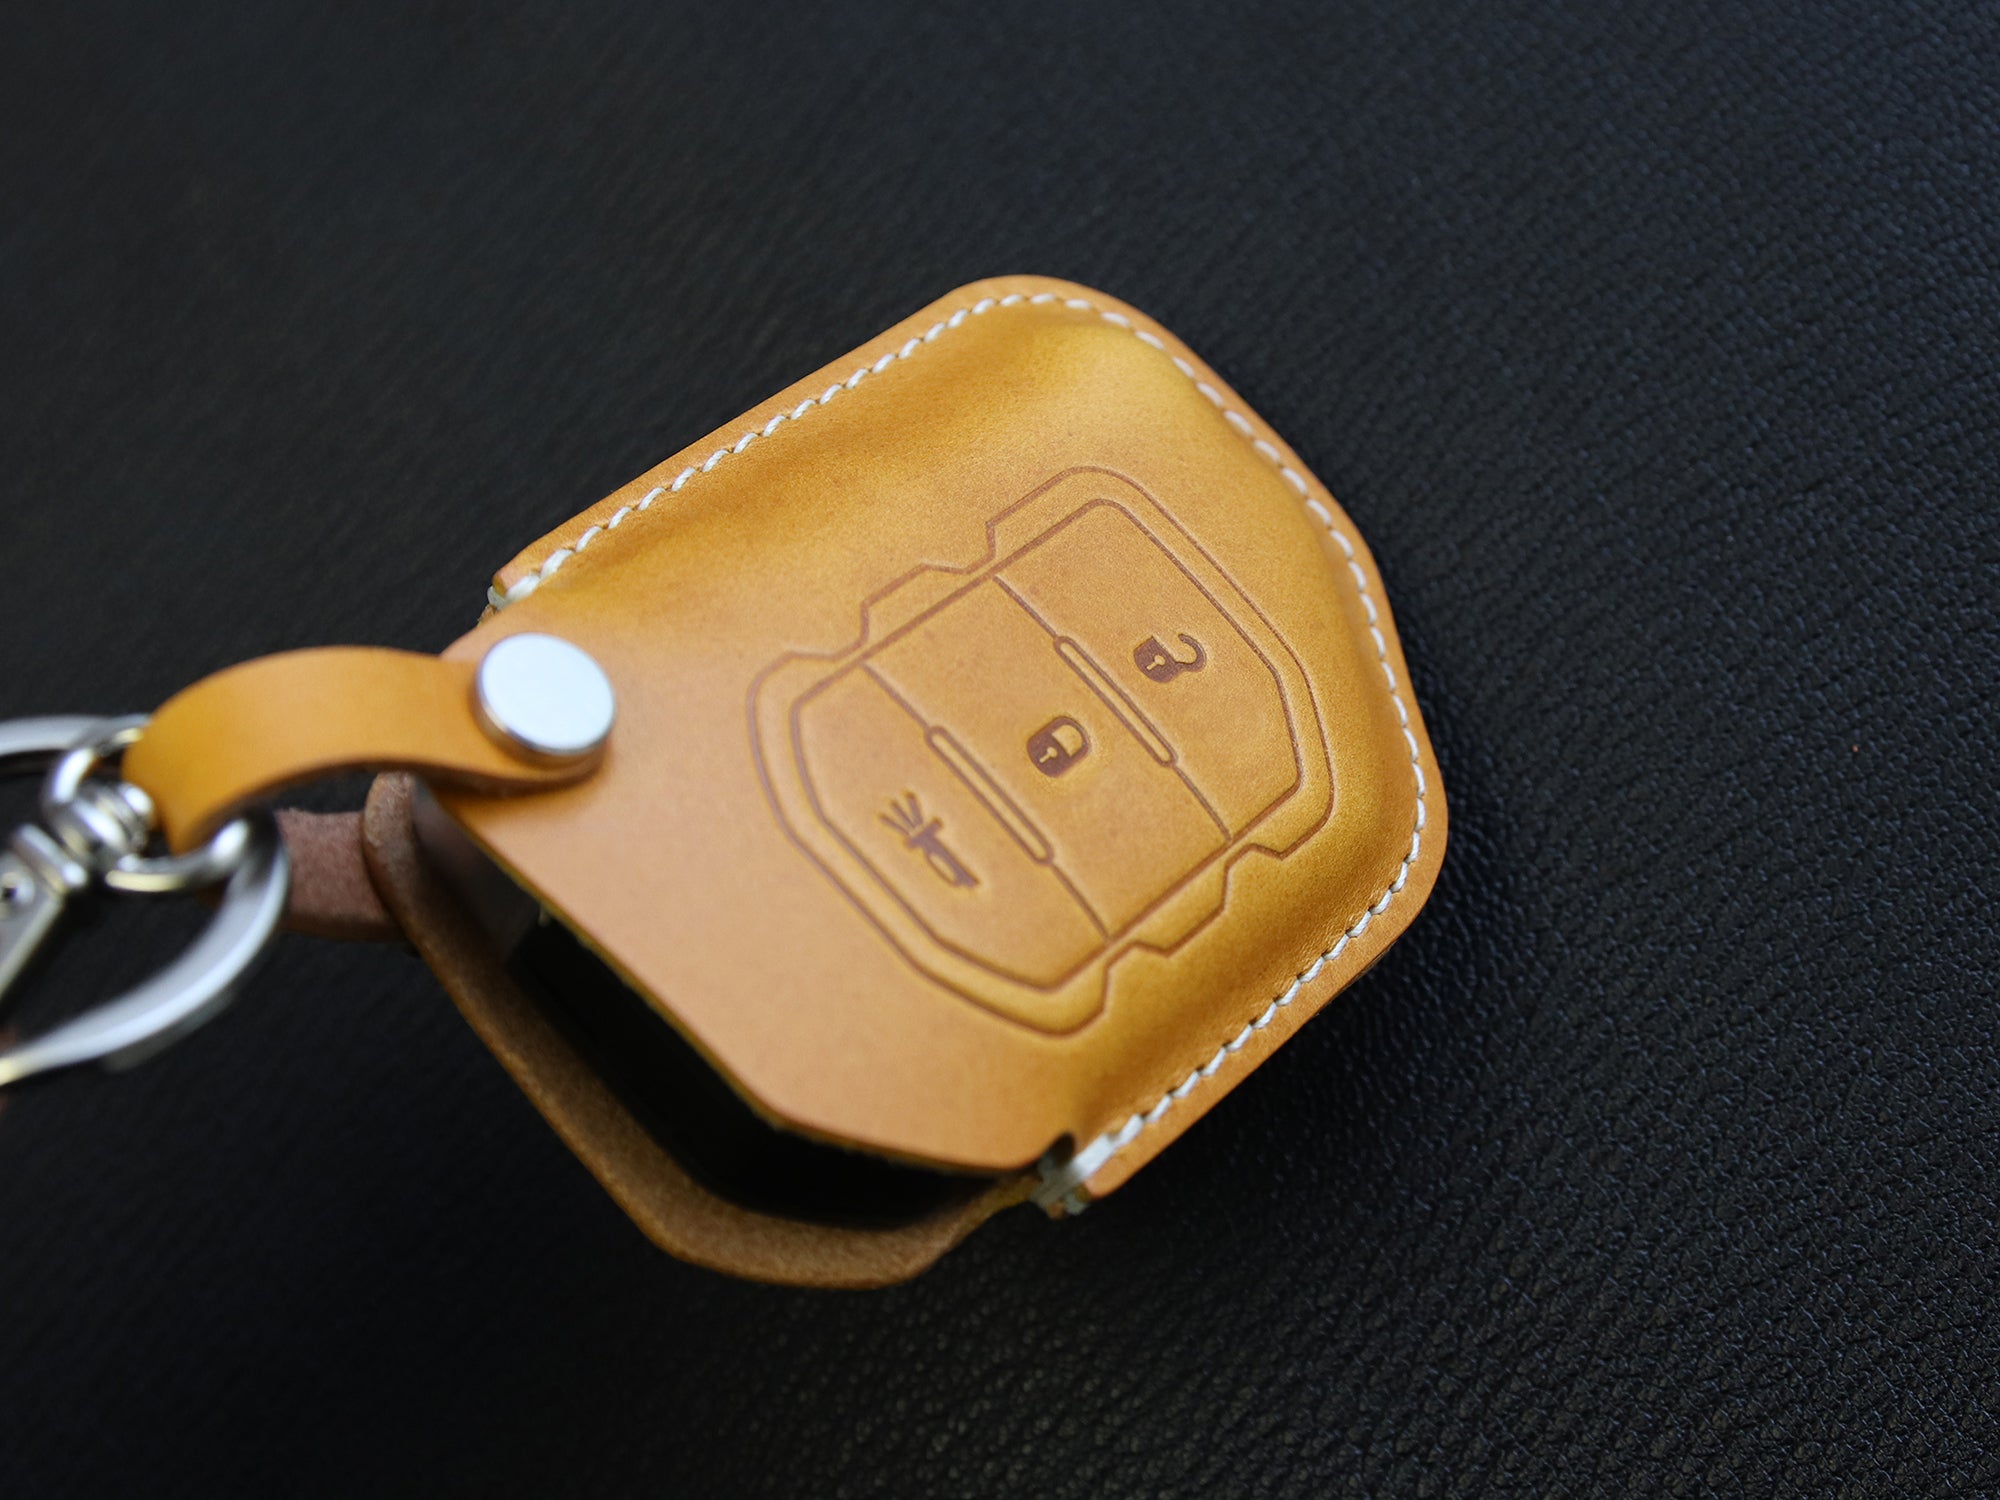 Keycare Italian leather key cover for Compass, Trailhawk 2 button smar